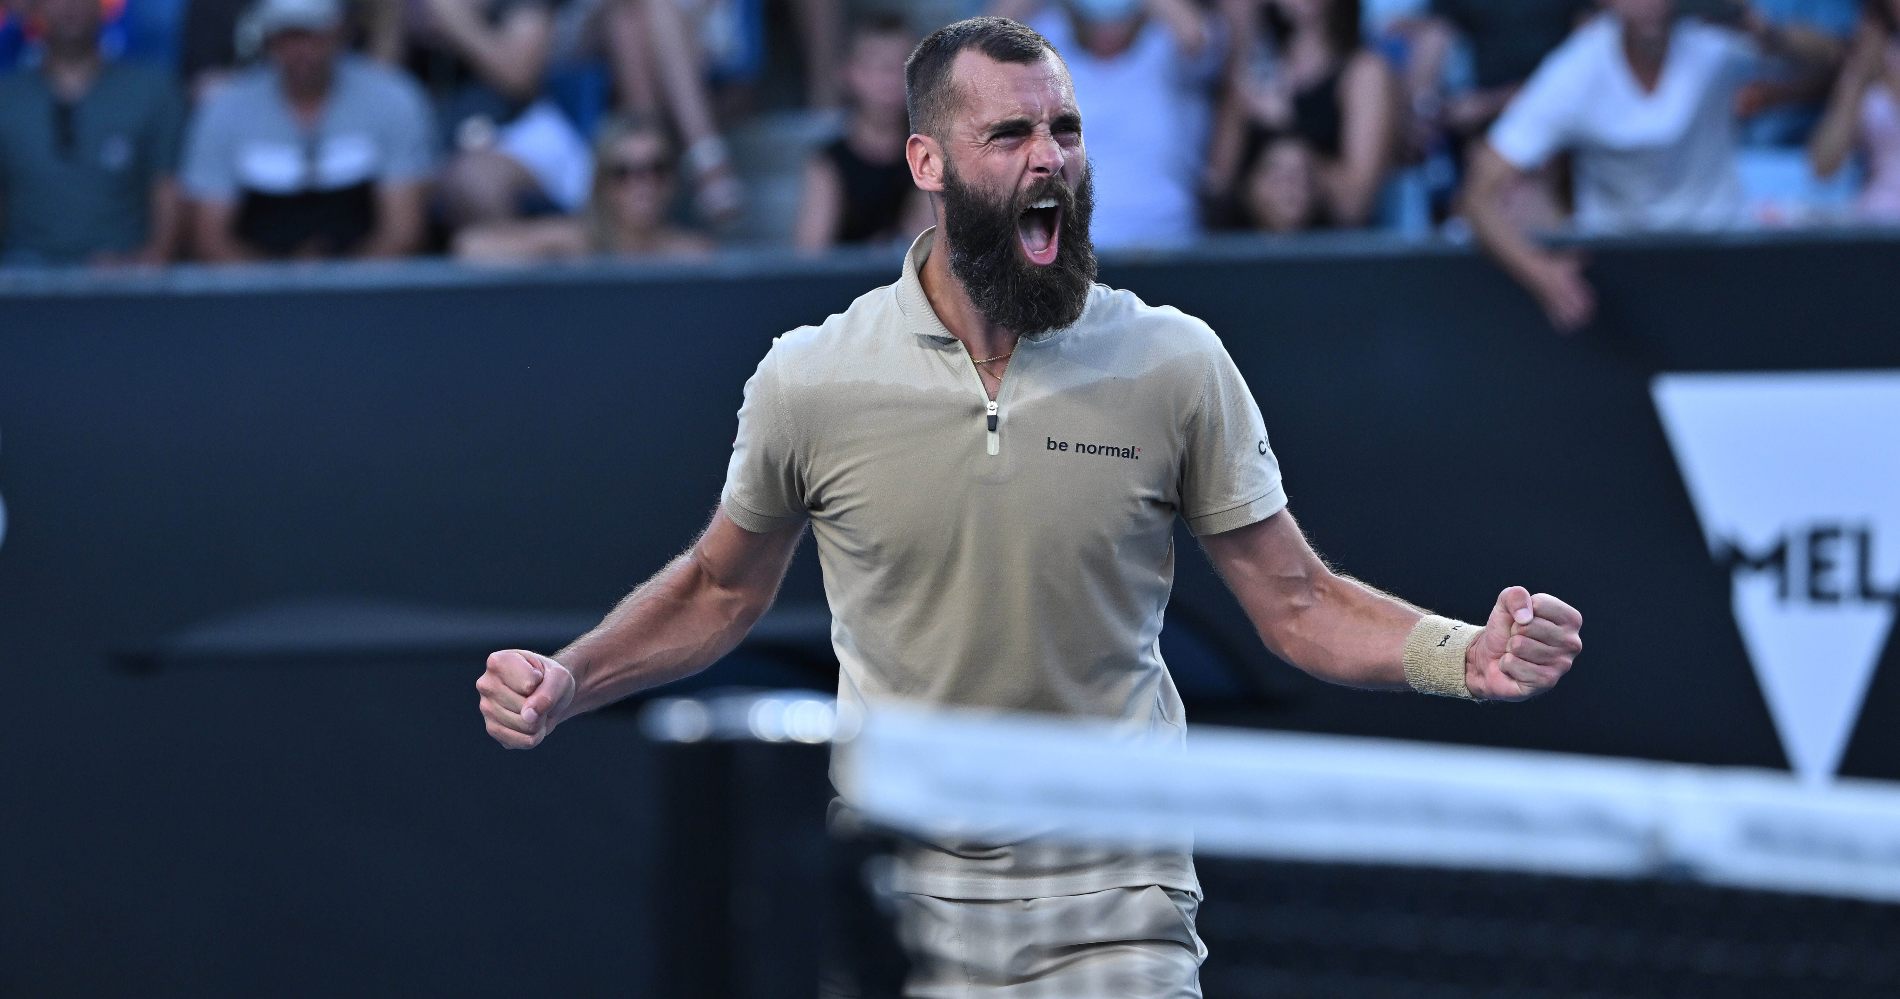 Tennis Dimitrov goes down to Paire in latest Grand Slam disappointment